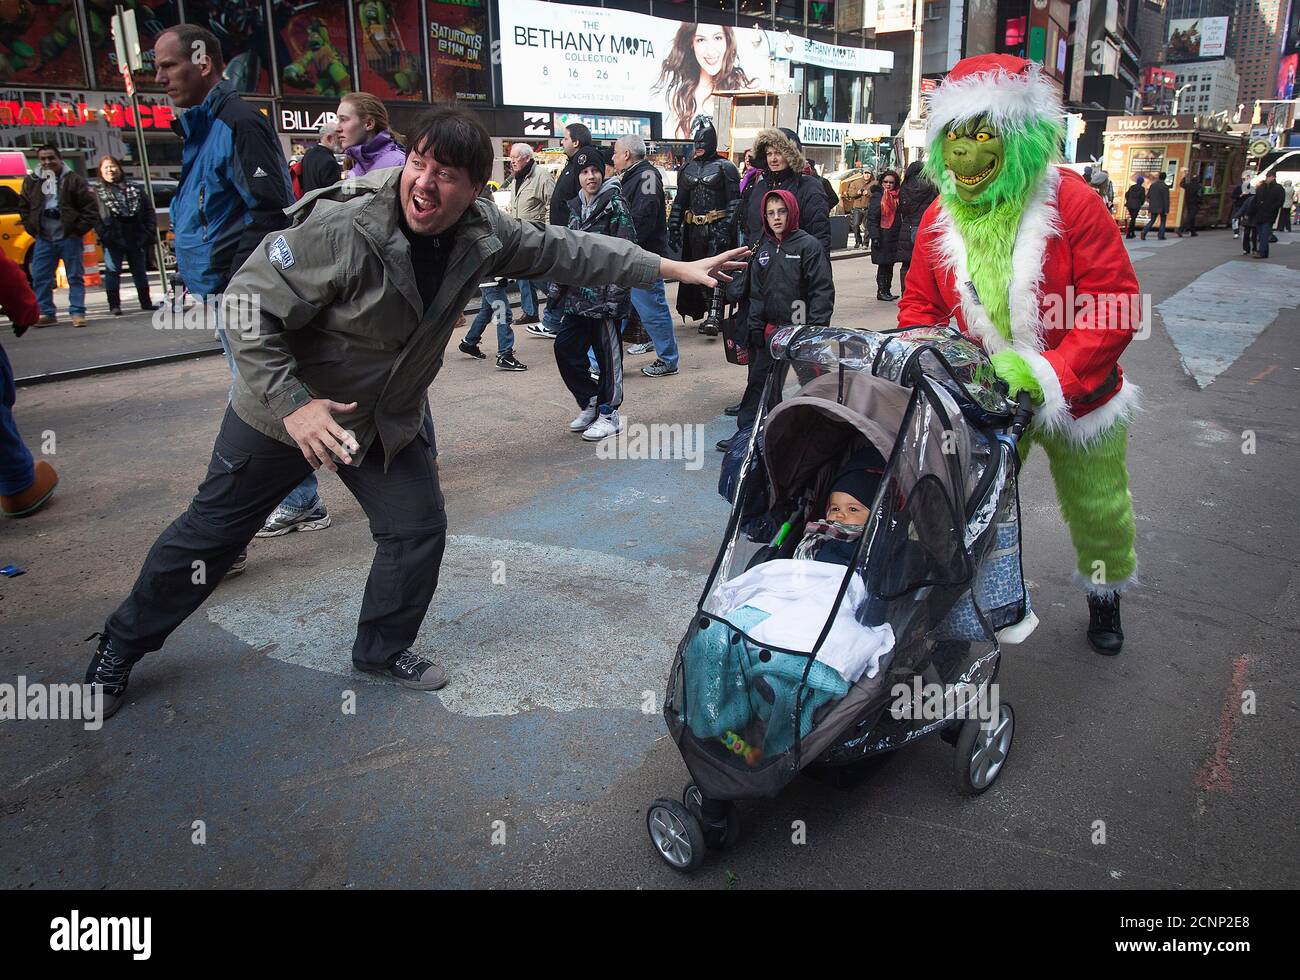 A man (R) dressed up as 'the Grinch', a fictional character by author Dr. Seuss, who poses for photos with people for money, poses for a picture with a baby in a stroller and his father in Times Square, during Black Friday sales in New York November 29, 2013. Black Friday, the day following Thanksgiving Day holiday, has traditionally been the busiest shopping day in the United States. REUTERS/Carlo Allegri (UNITED STATES - Tags: BUSINESS SOCIETY TPX IMAGES OF THE DAY) Stock Photo